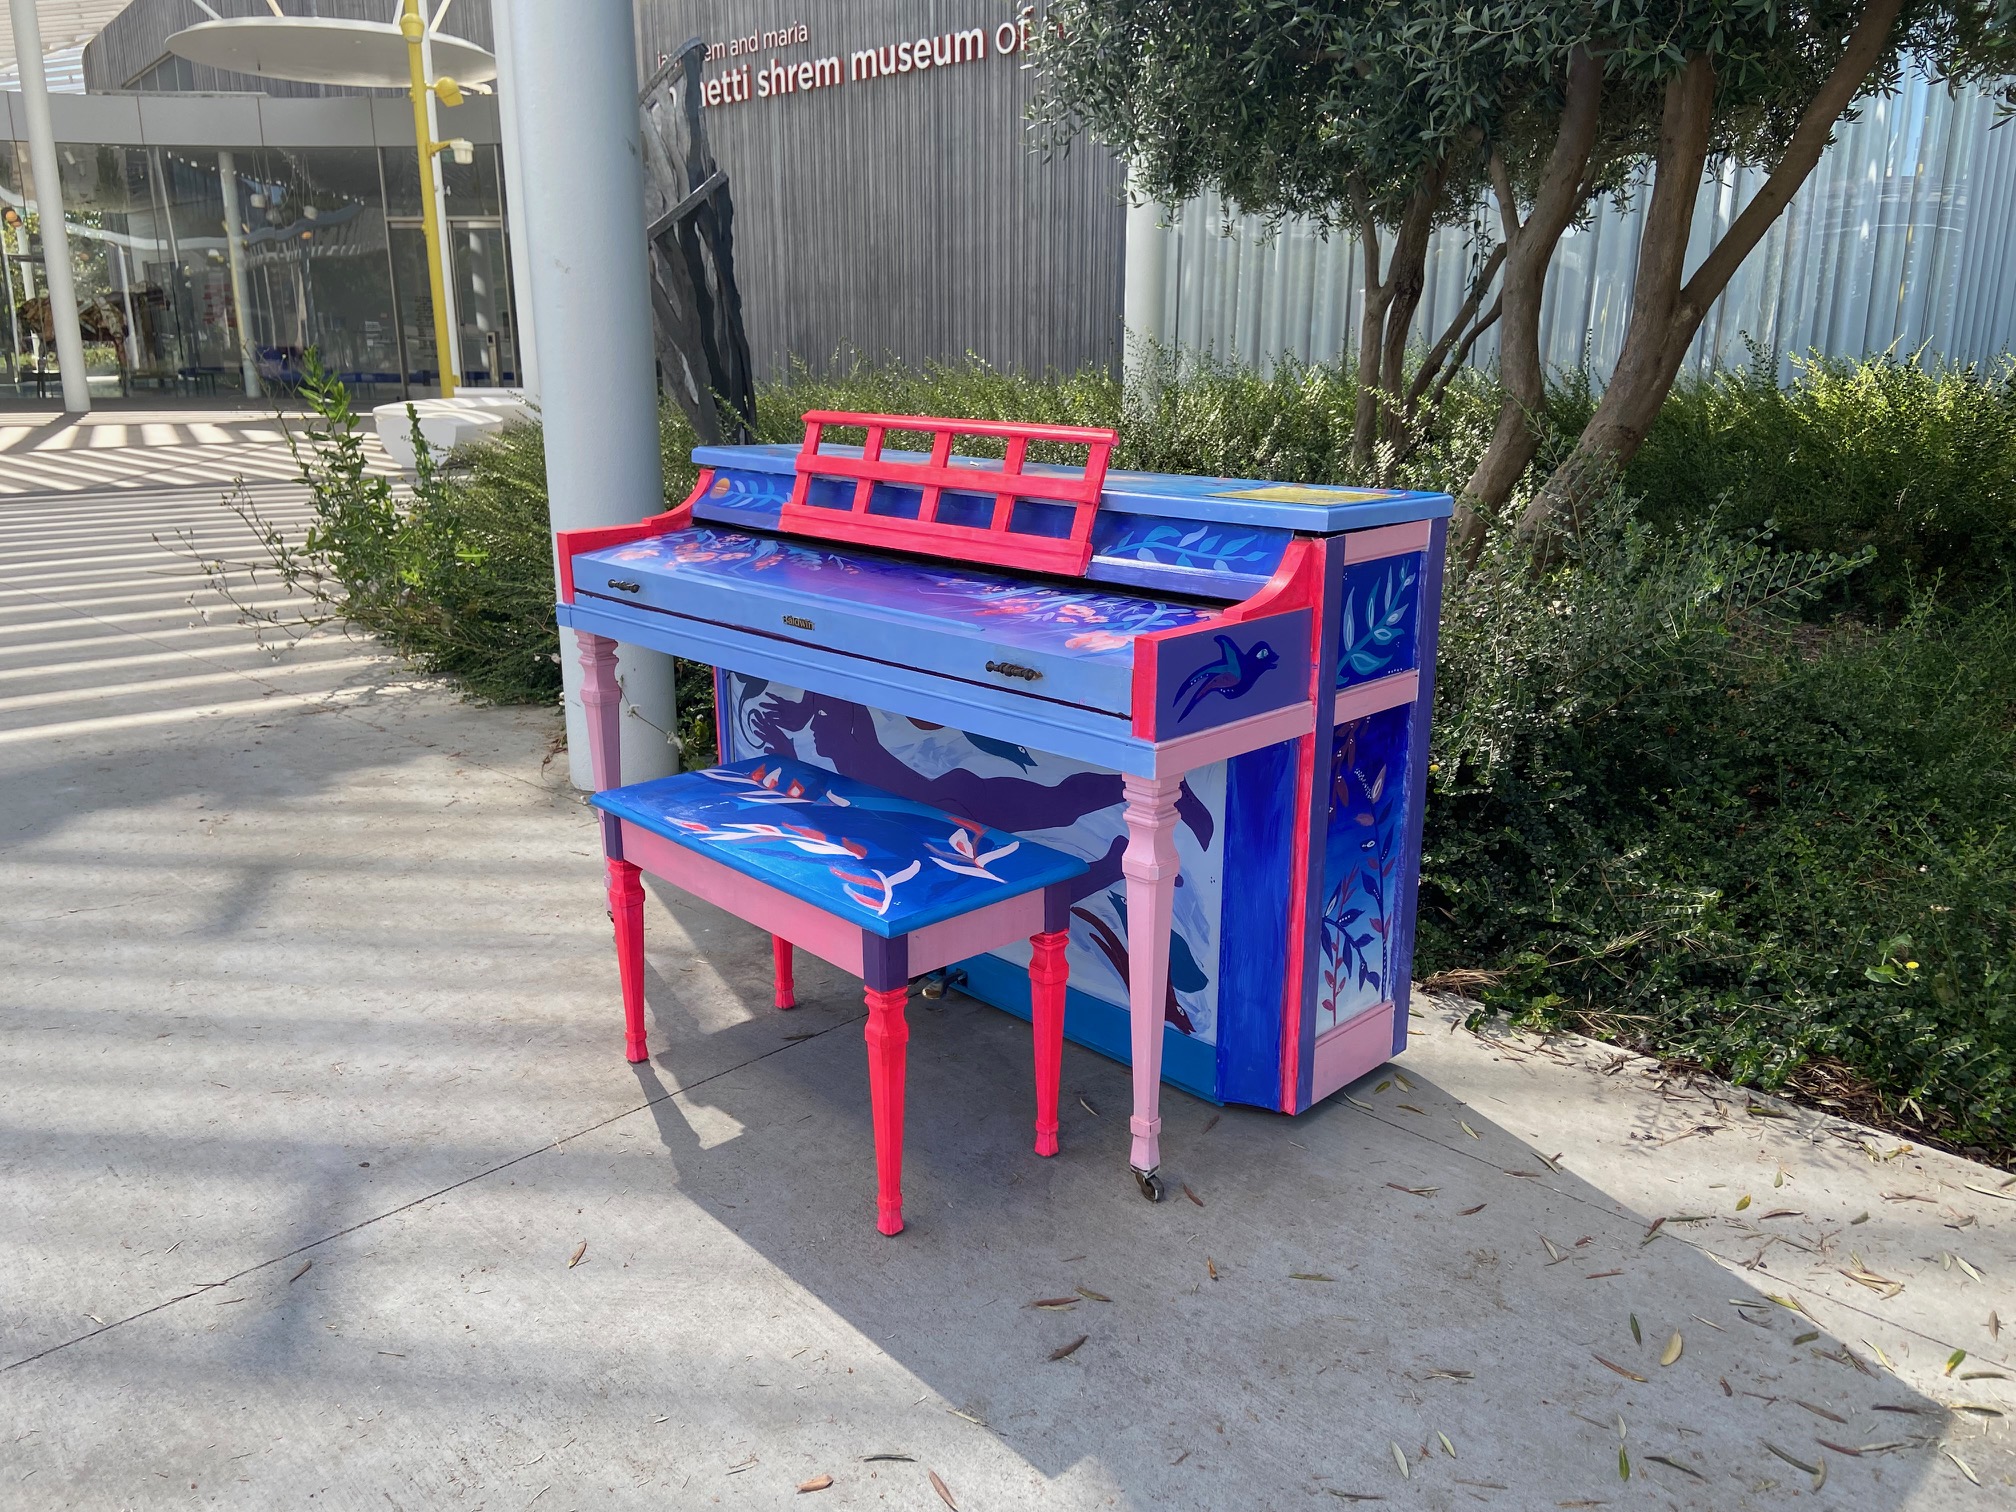 Colorful blue and pinkish hues decorate the piano in front of the Manetti Shrem Museum of Art